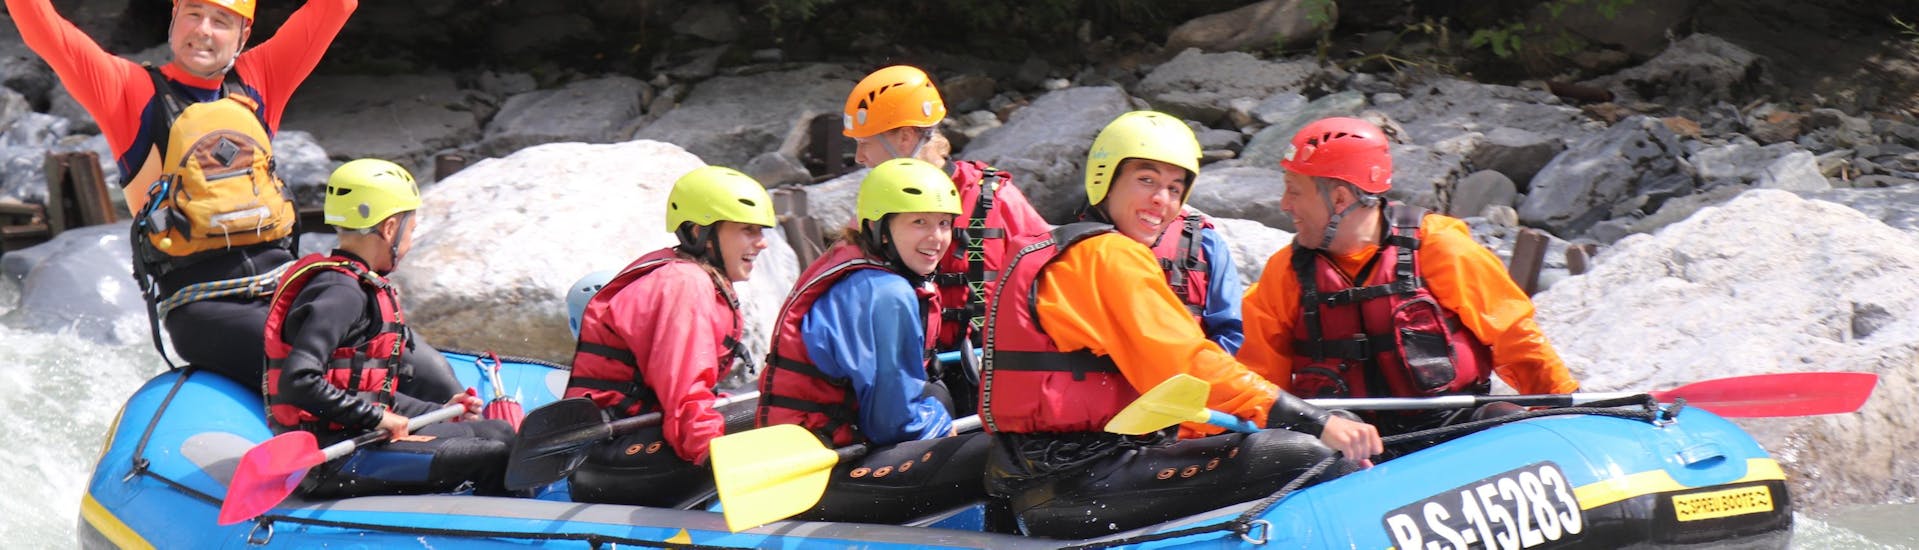 Participants sit in the raft with a guide and have fun during the rafting tour on the Saalach with Adventure Service Outdoorsports.